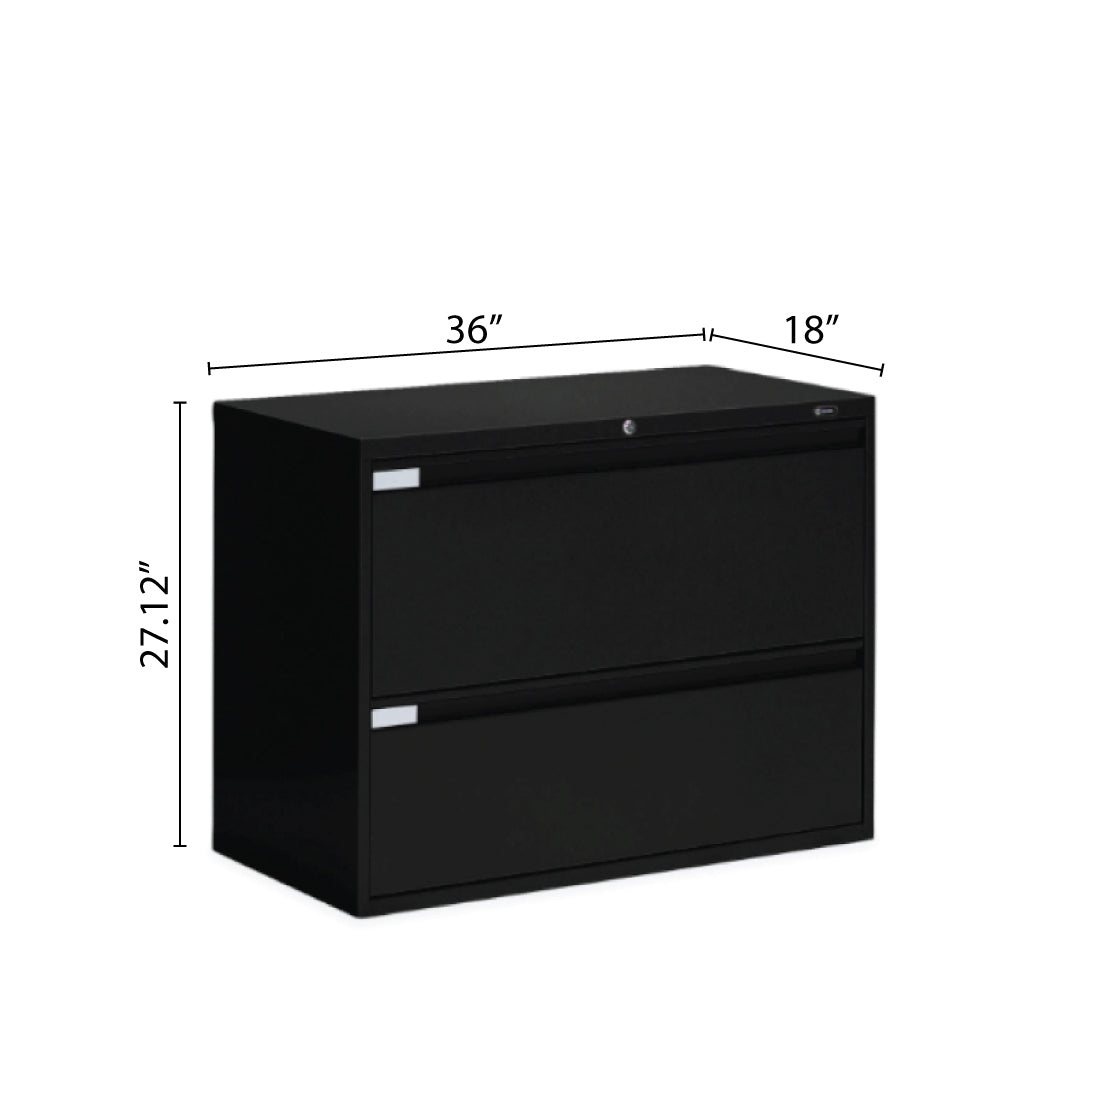 2 Drawer Lateral File (36"W) - Kainosbuy.com